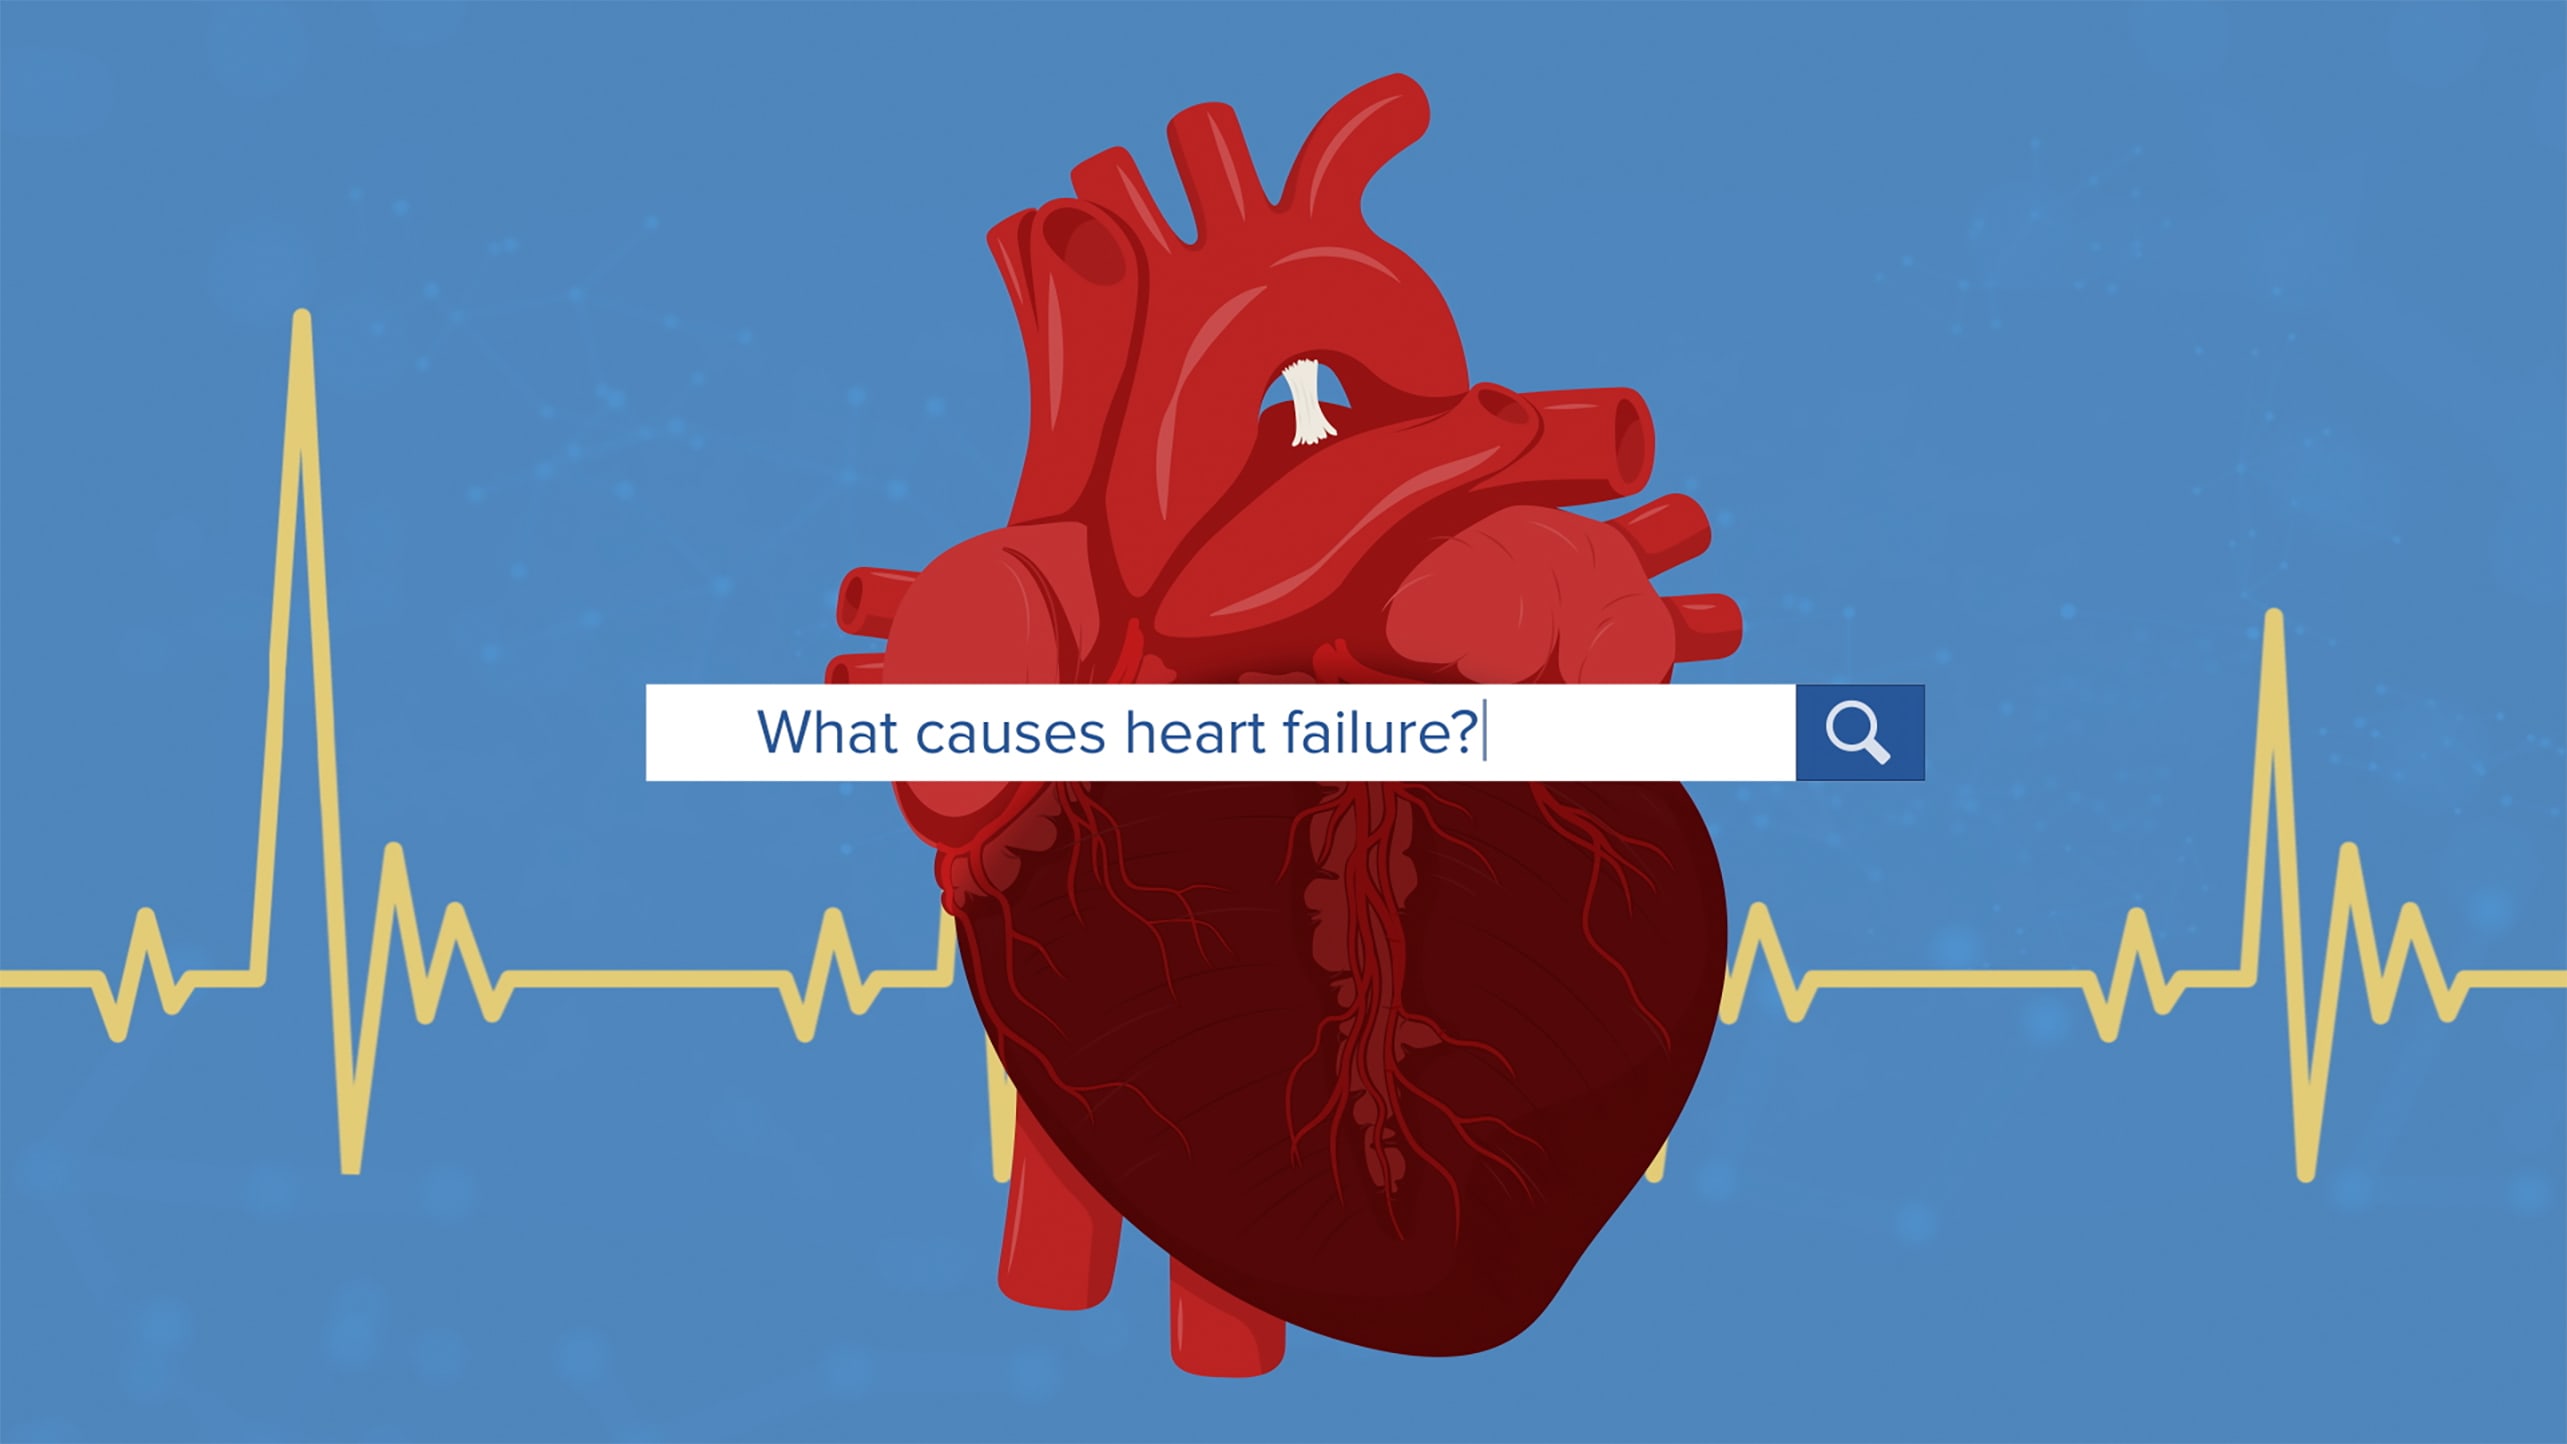 A drawing of a heart with the text "What causes heart failure?" over it.